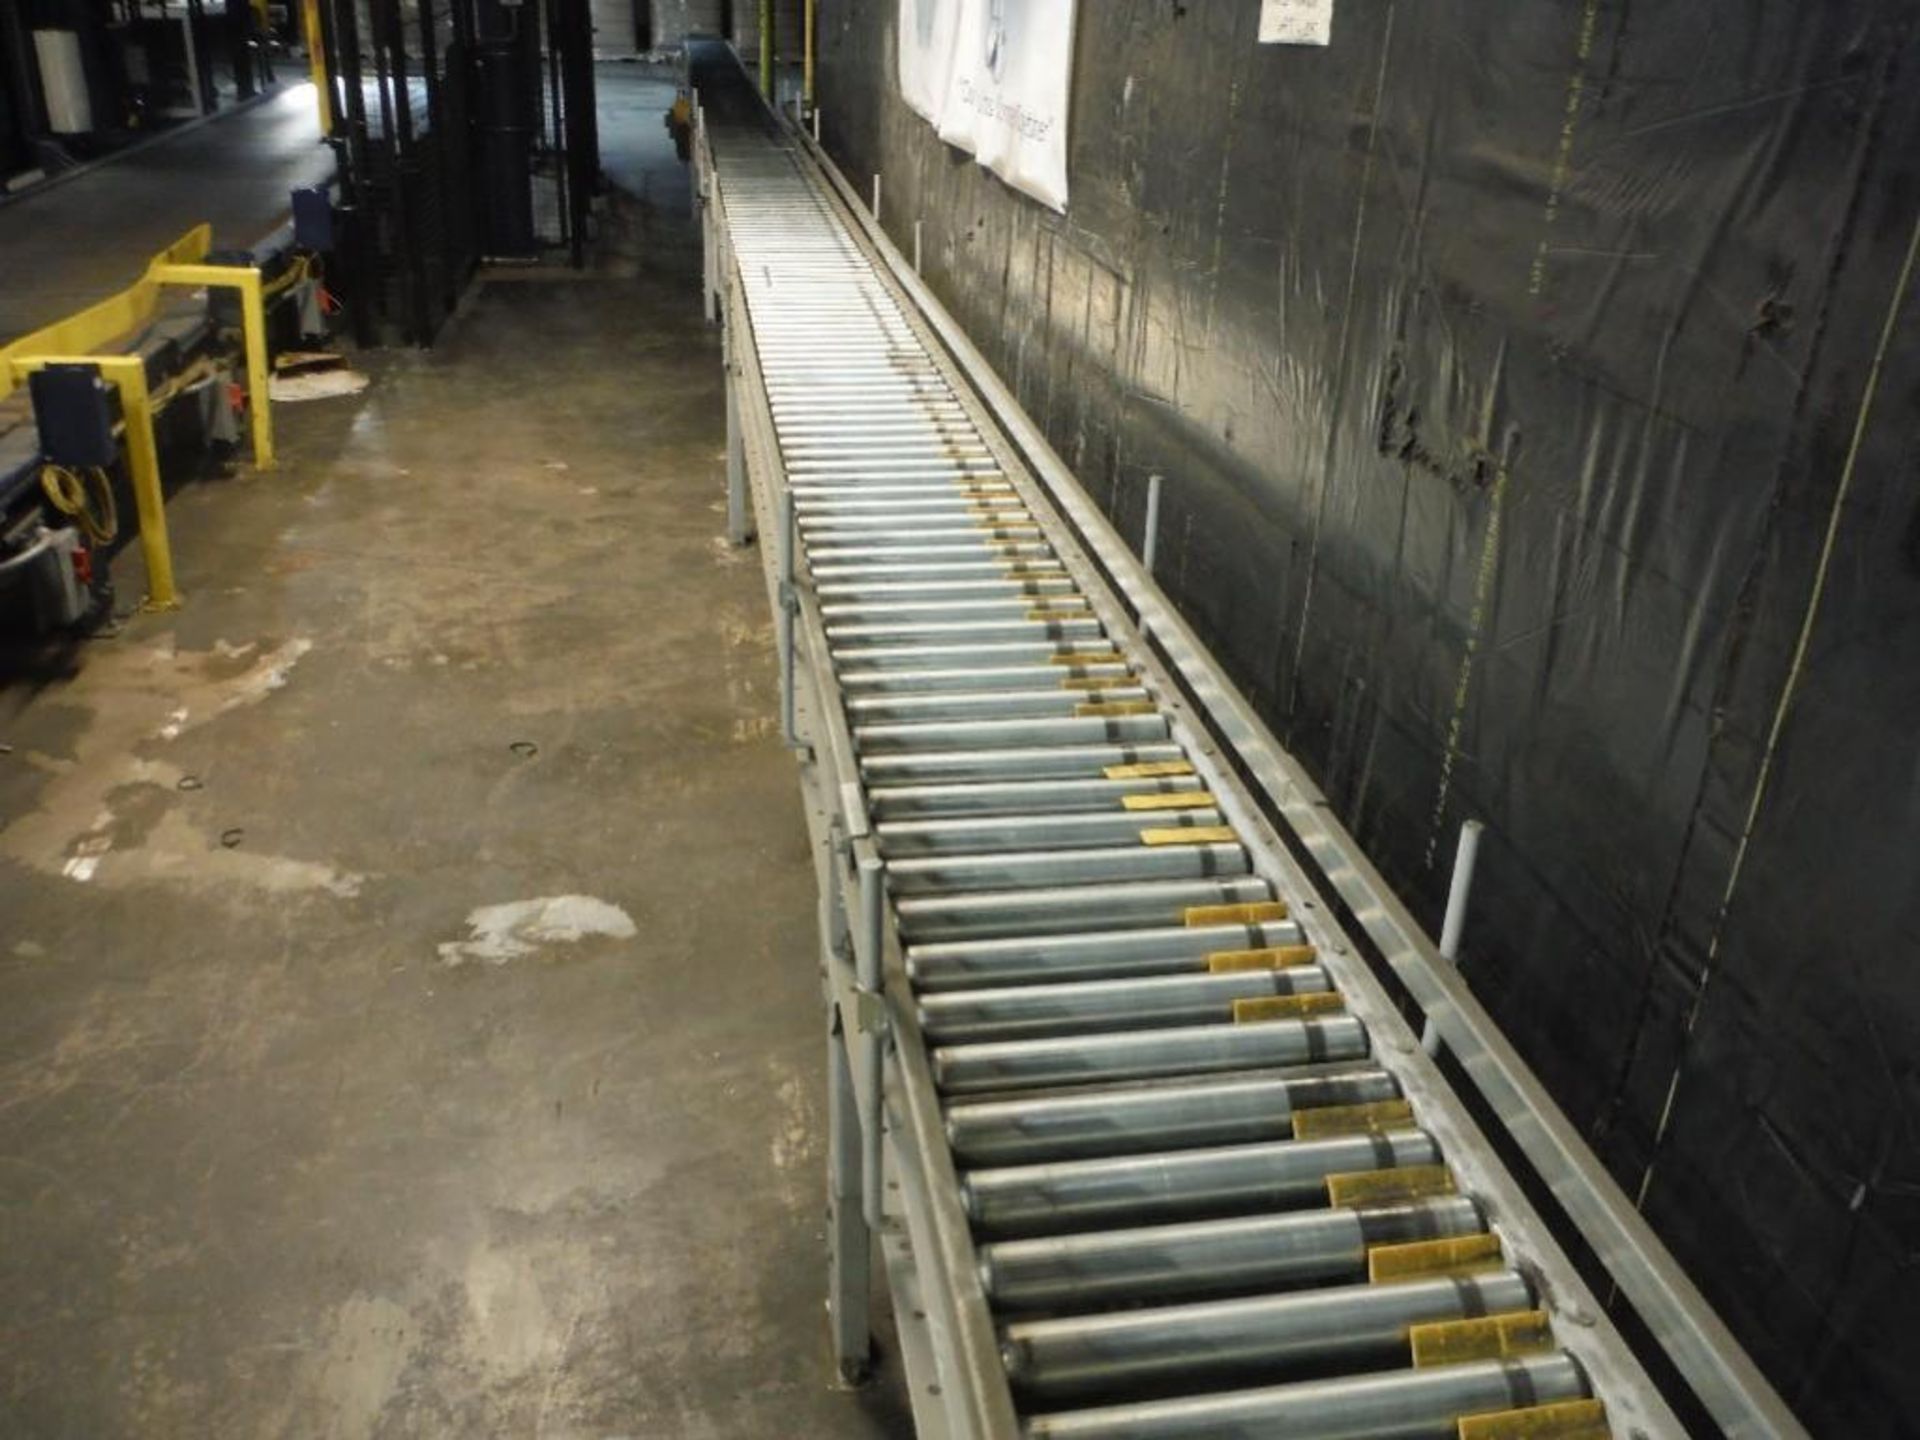 Hytrol powered roller conveyor, 80 ft. L x 15 in. W x 30 in. H, 3 drives. - RIGGING FEE FOR DOMESTIC - Image 5 of 6